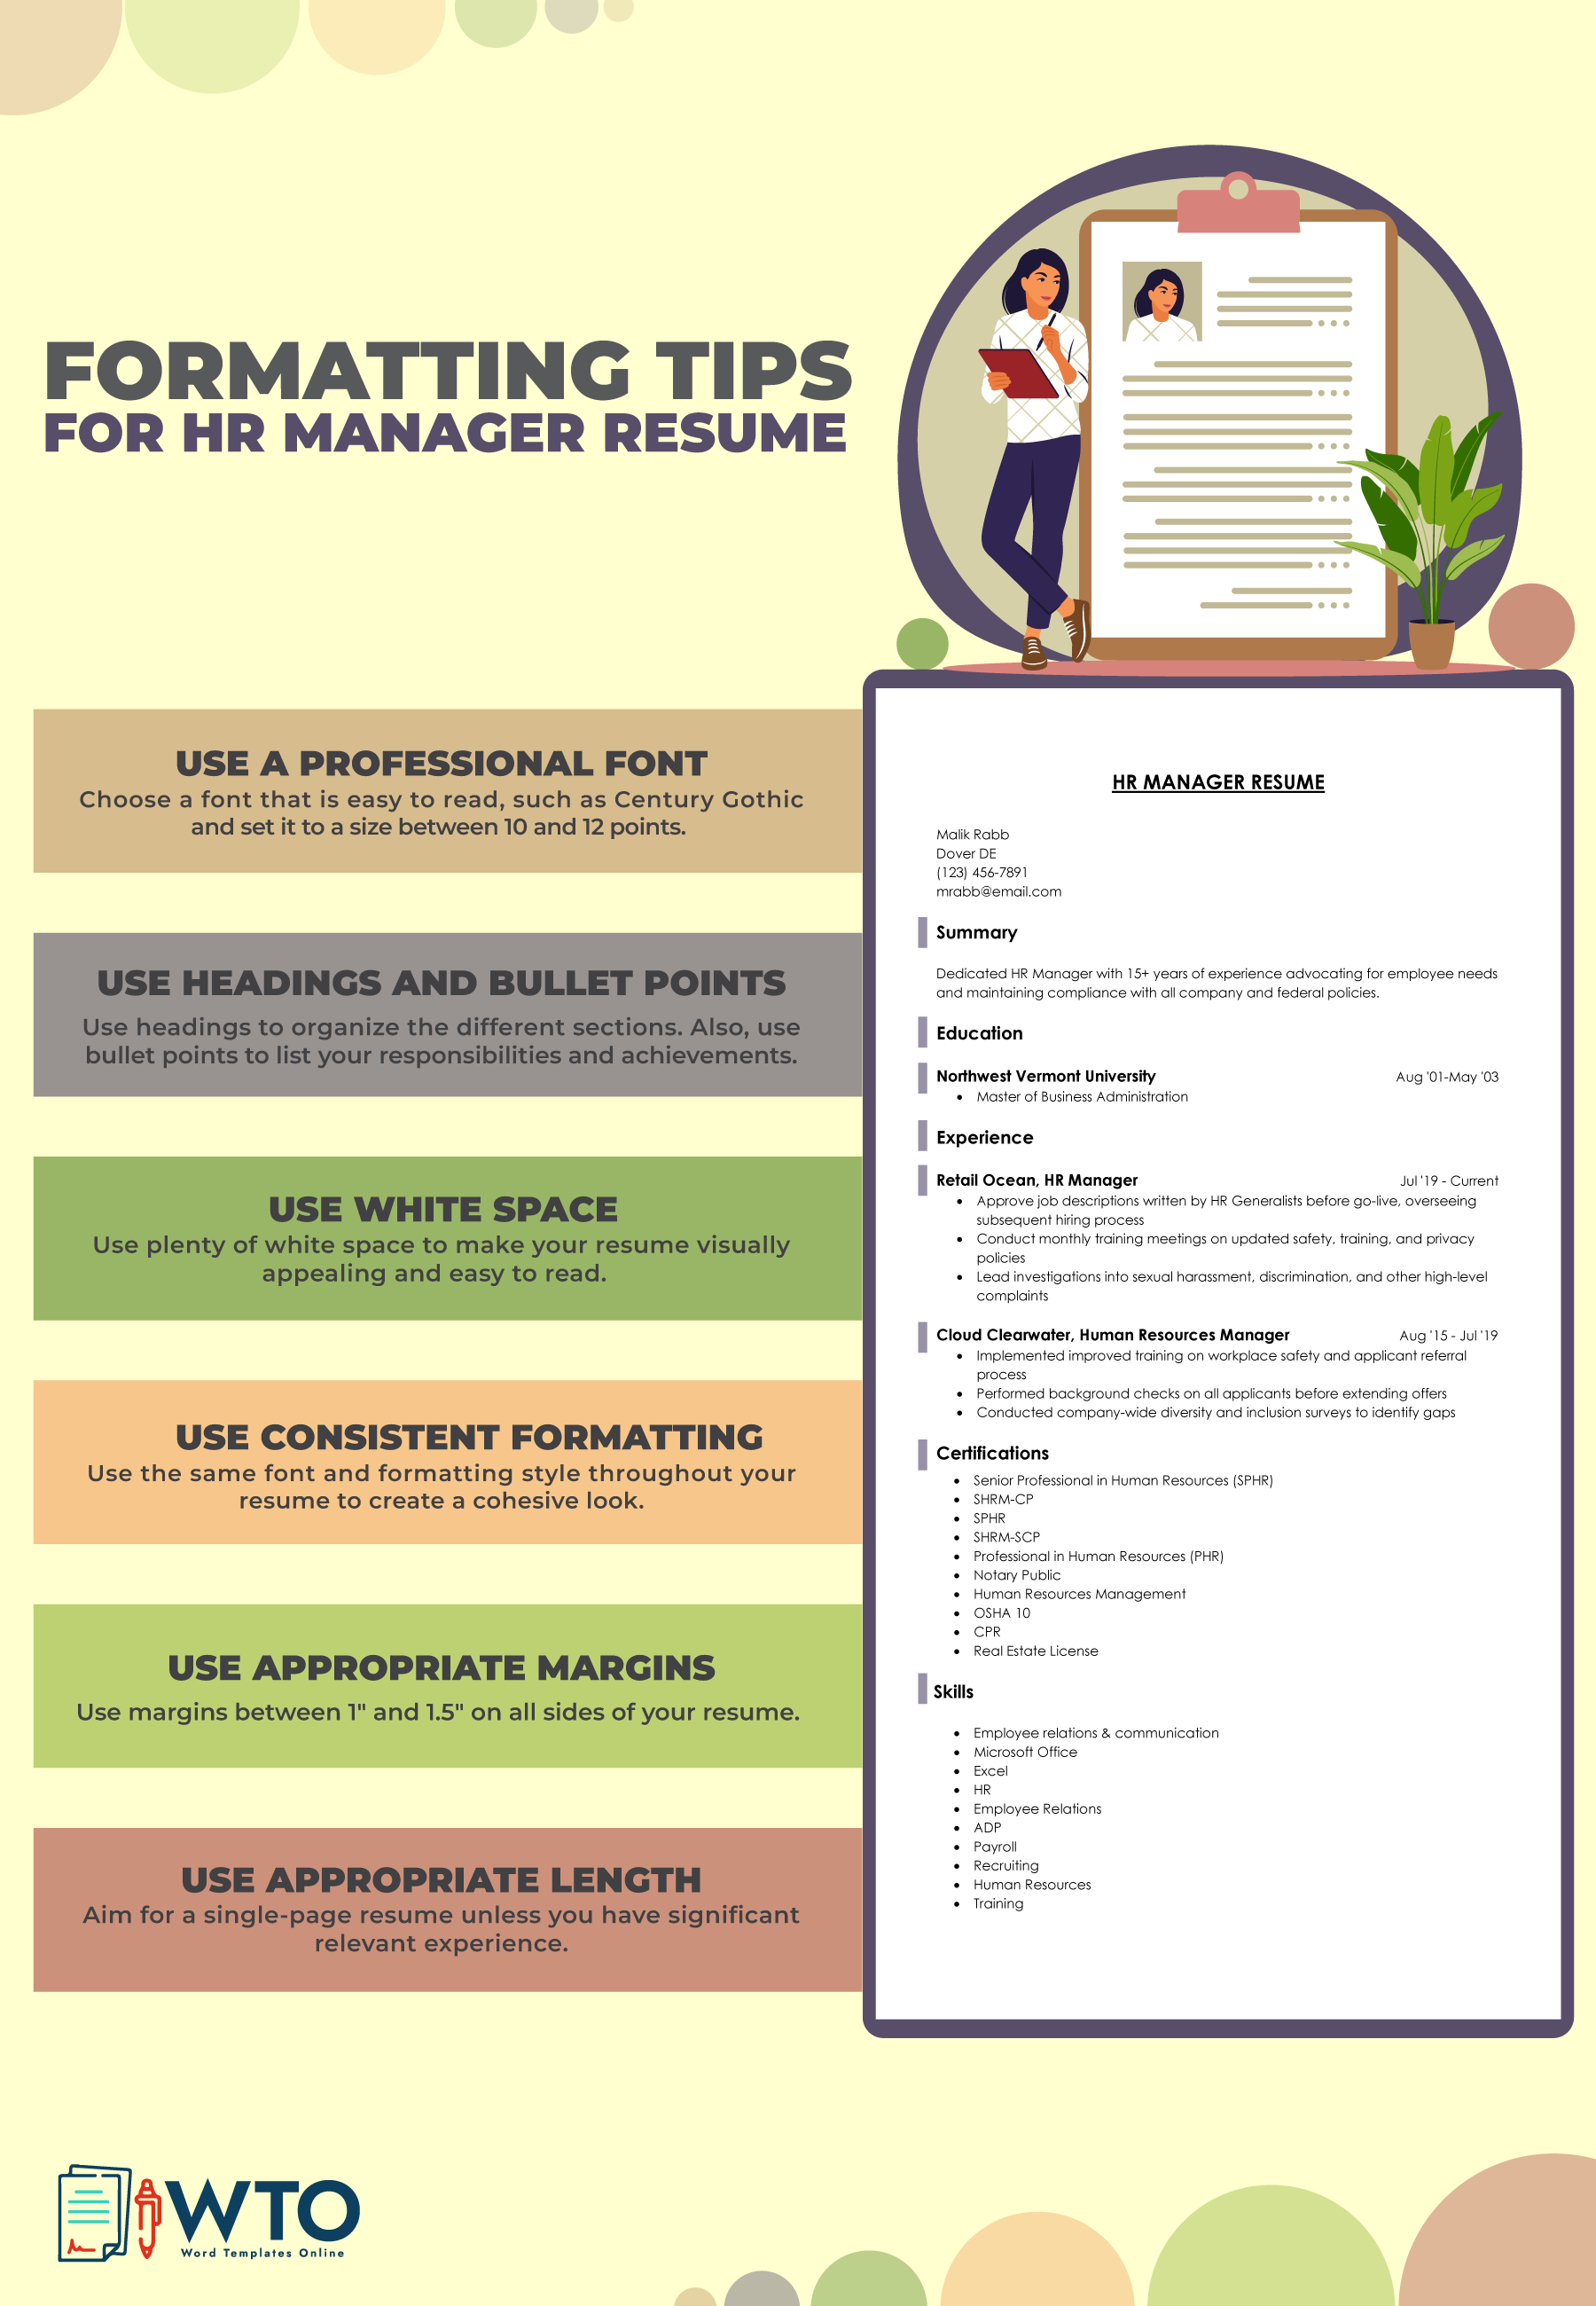 This infographic tells the formatting tips for HR Manager Resume.